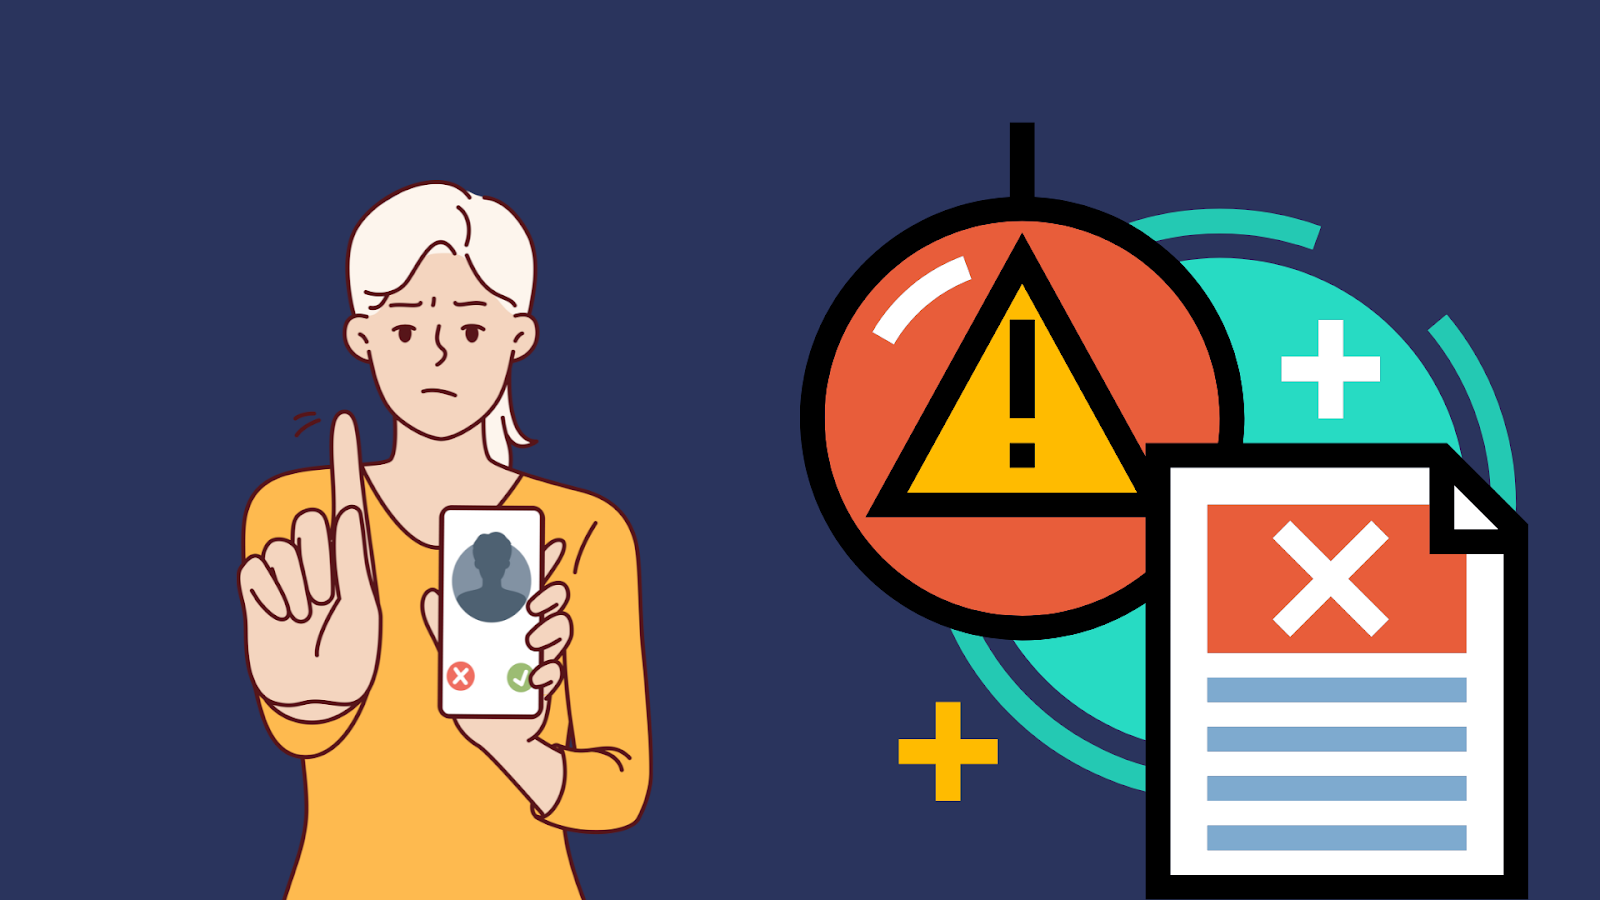 Graphic of a person holding a phone with a caution symbol, highlighting the importance of Phone Validator tools in screening calls for security.